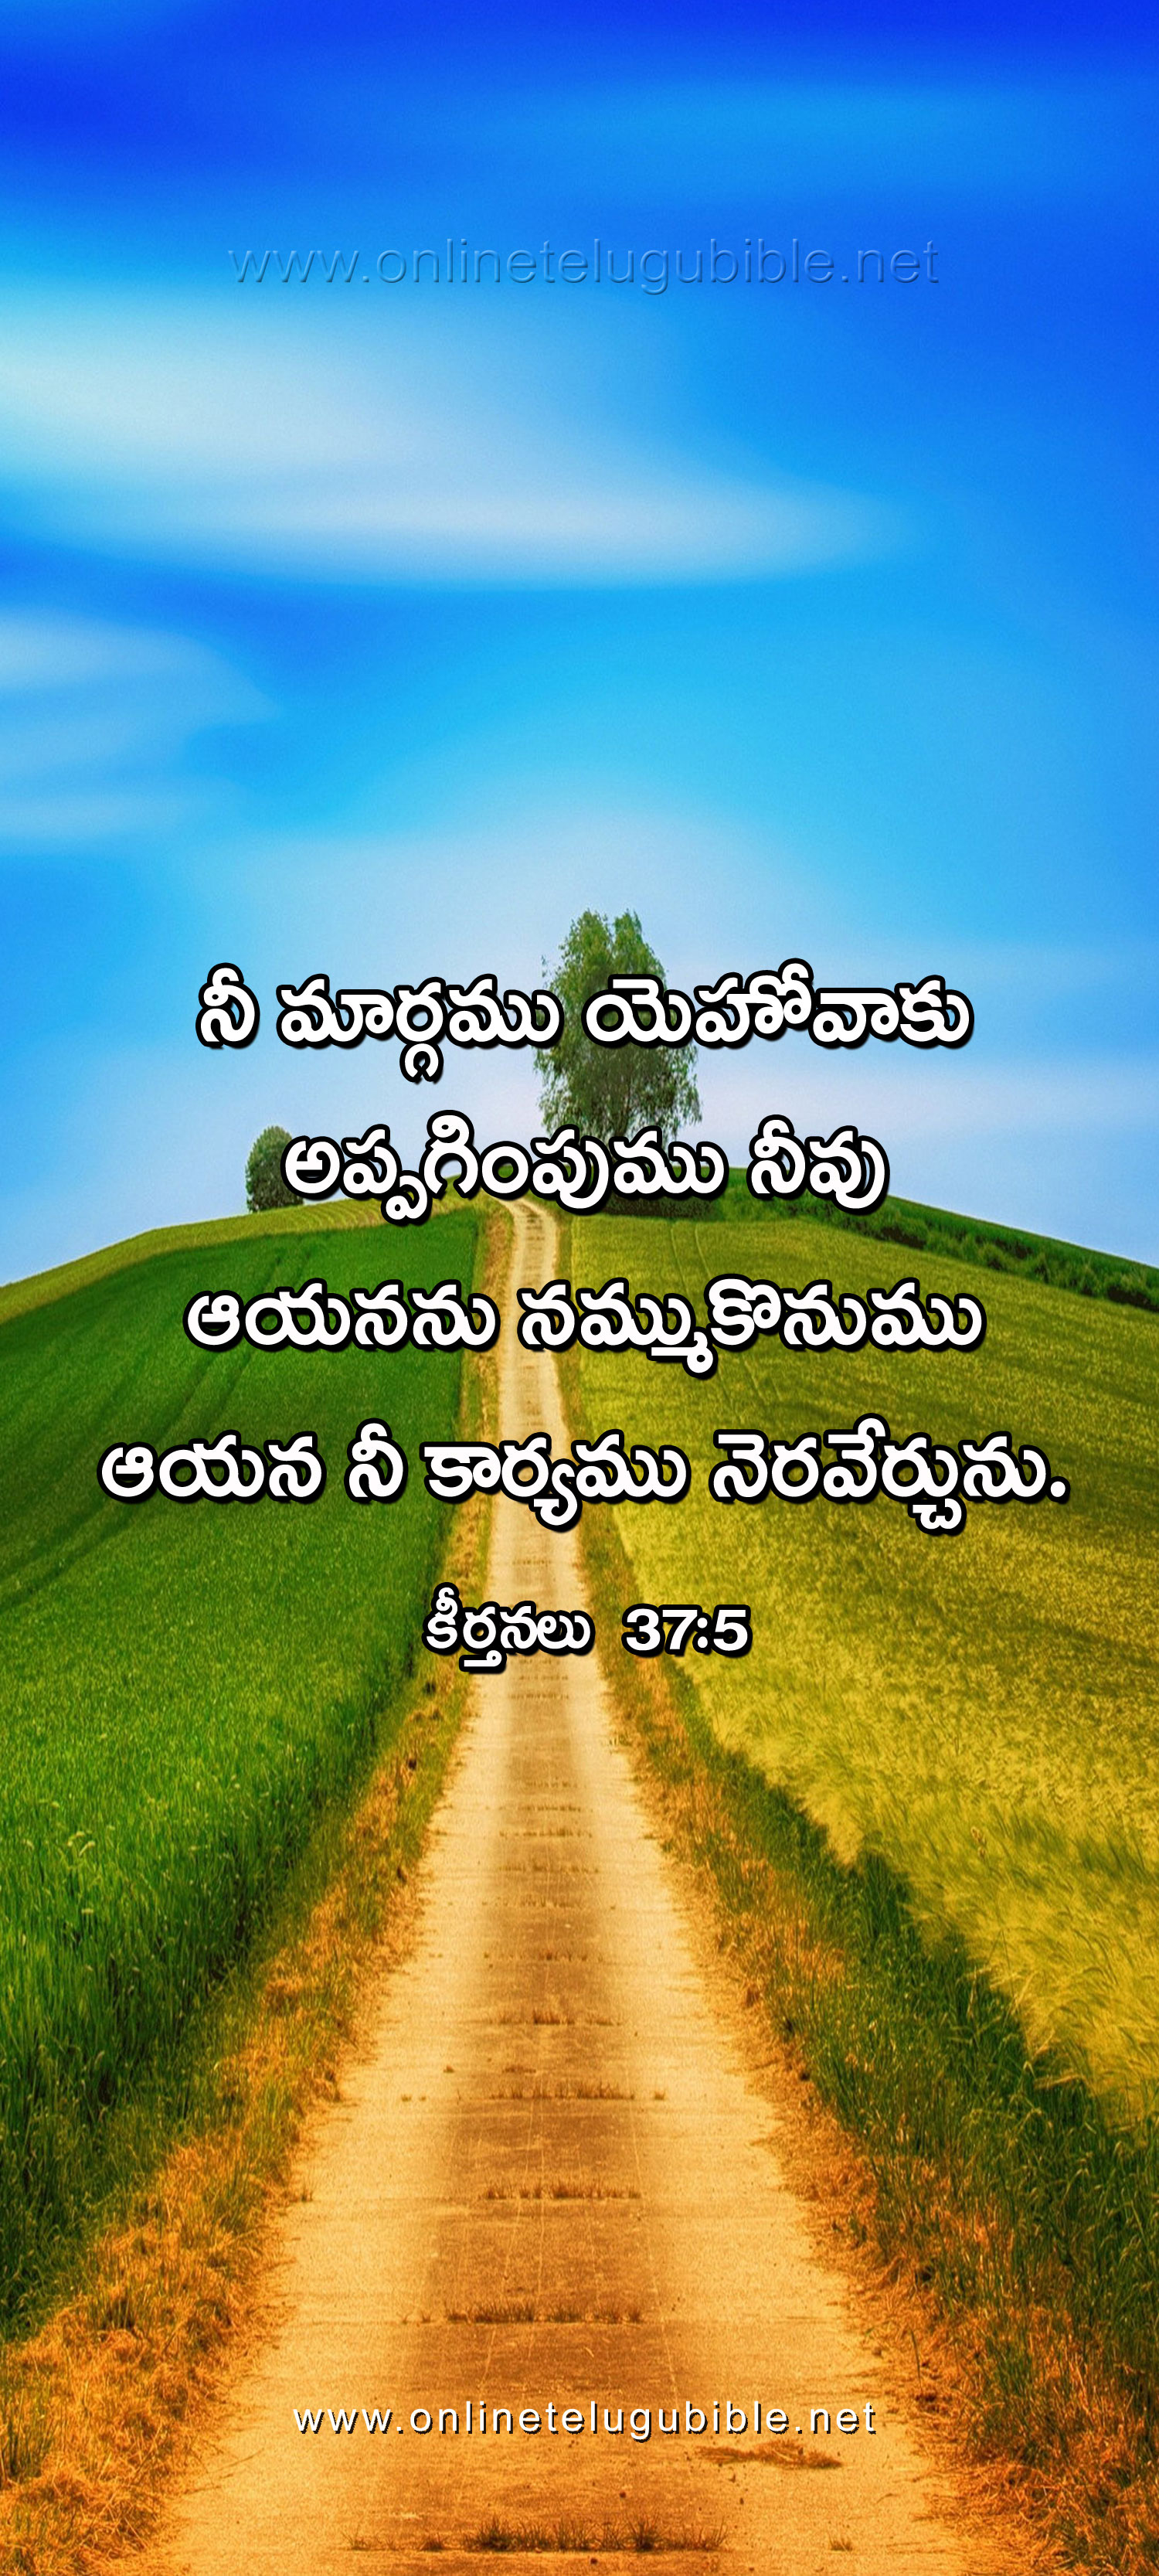 Bible Literature Ministry-Mobile Wallpapers